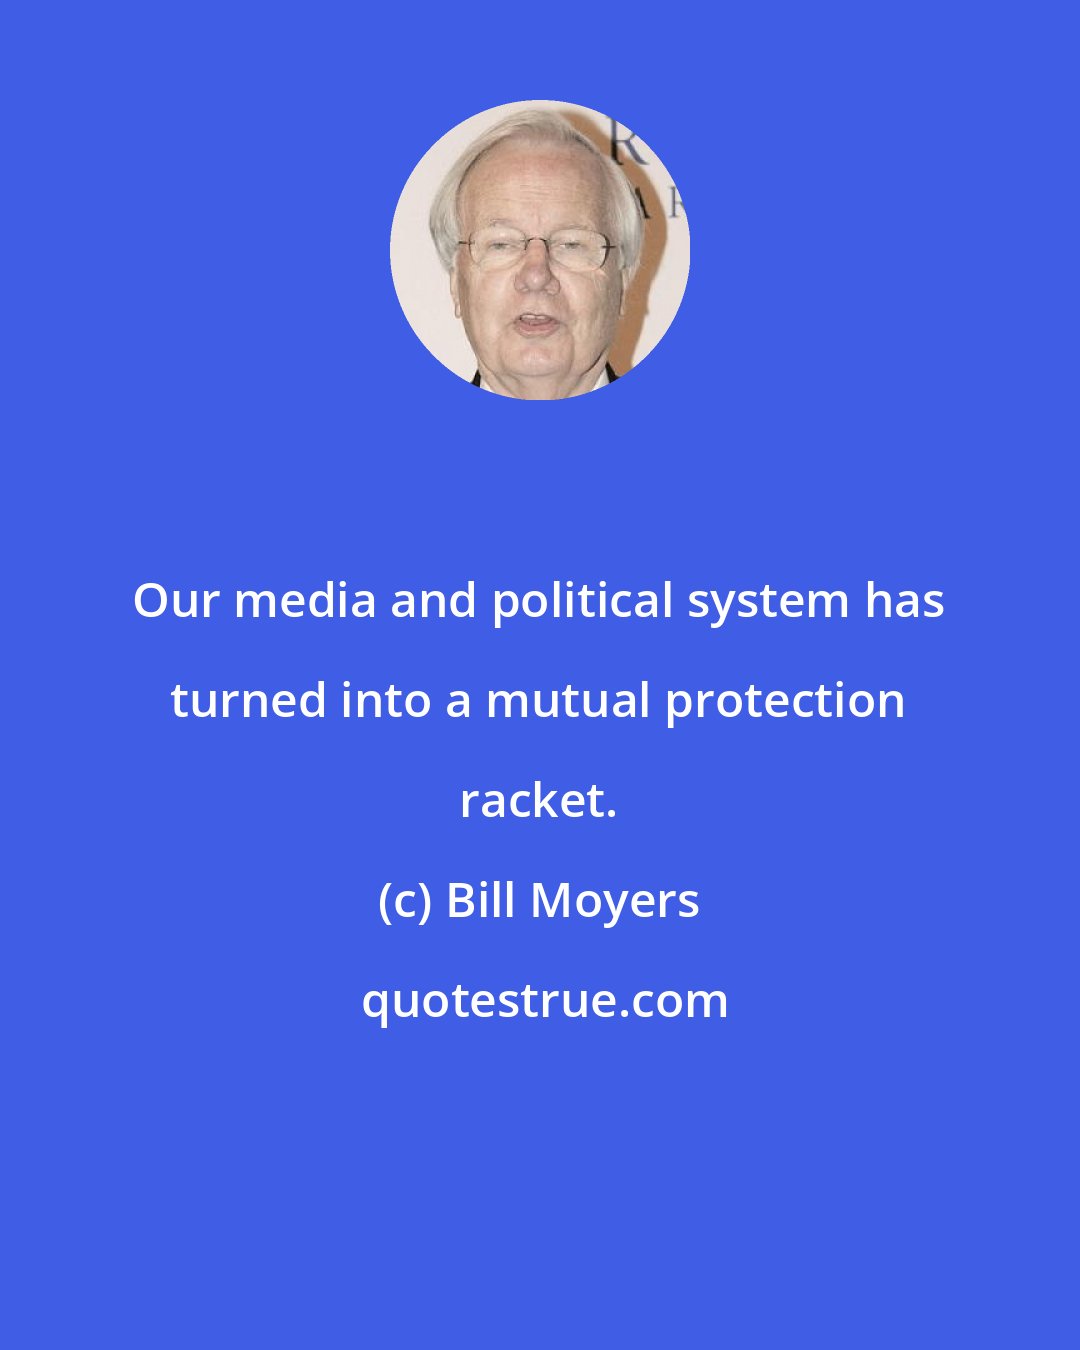 Bill Moyers: Our media and political system has turned into a mutual protection racket.